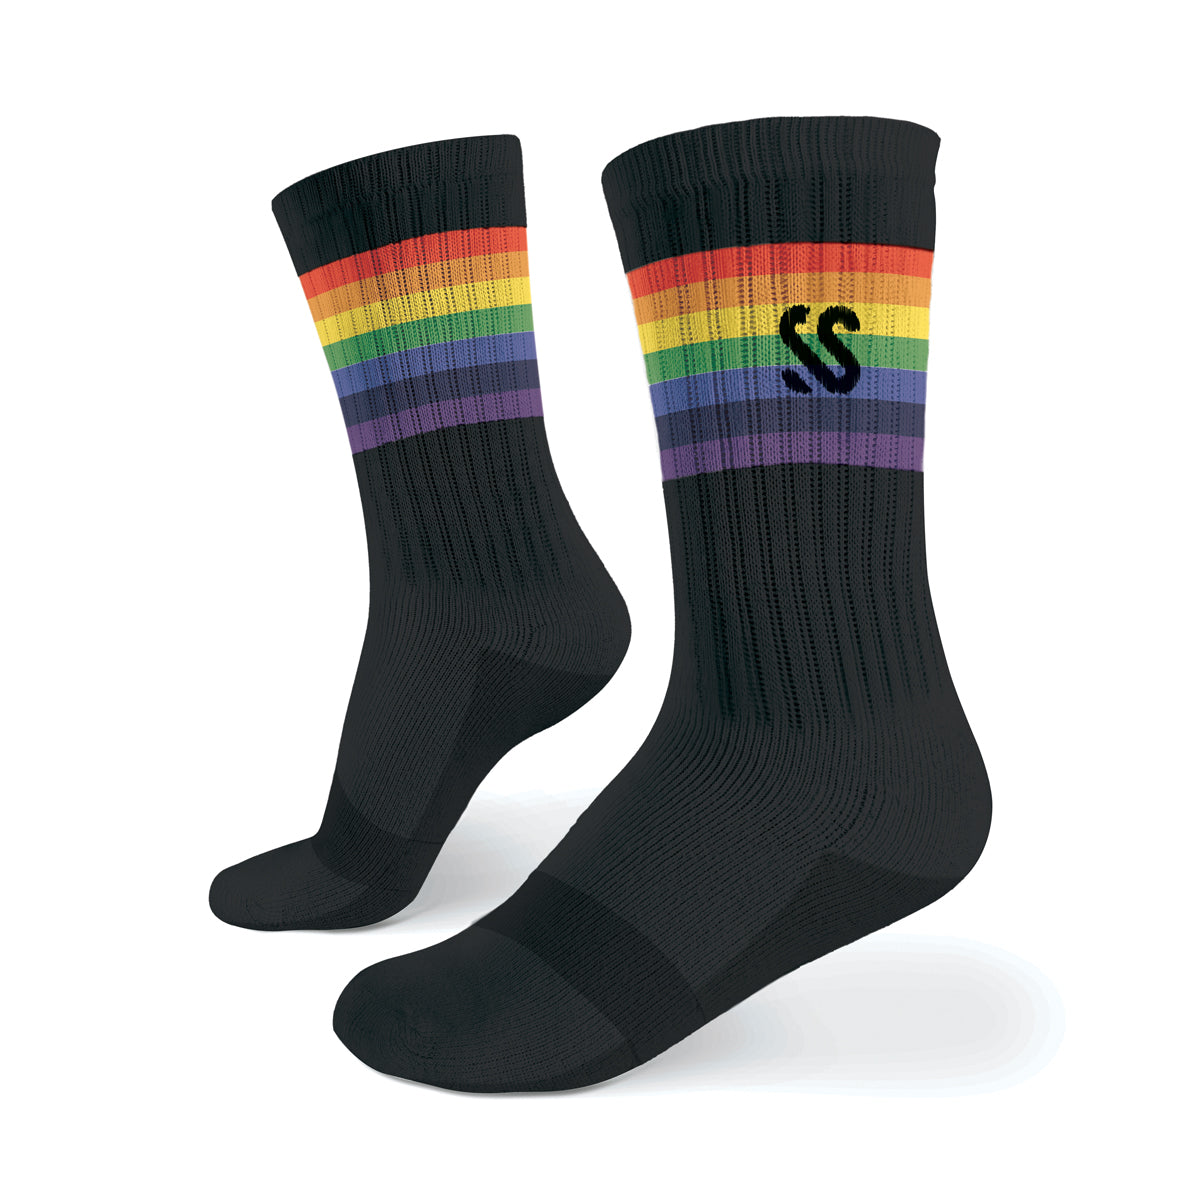 A pair of black socks with a rainbow band made from combed cotton